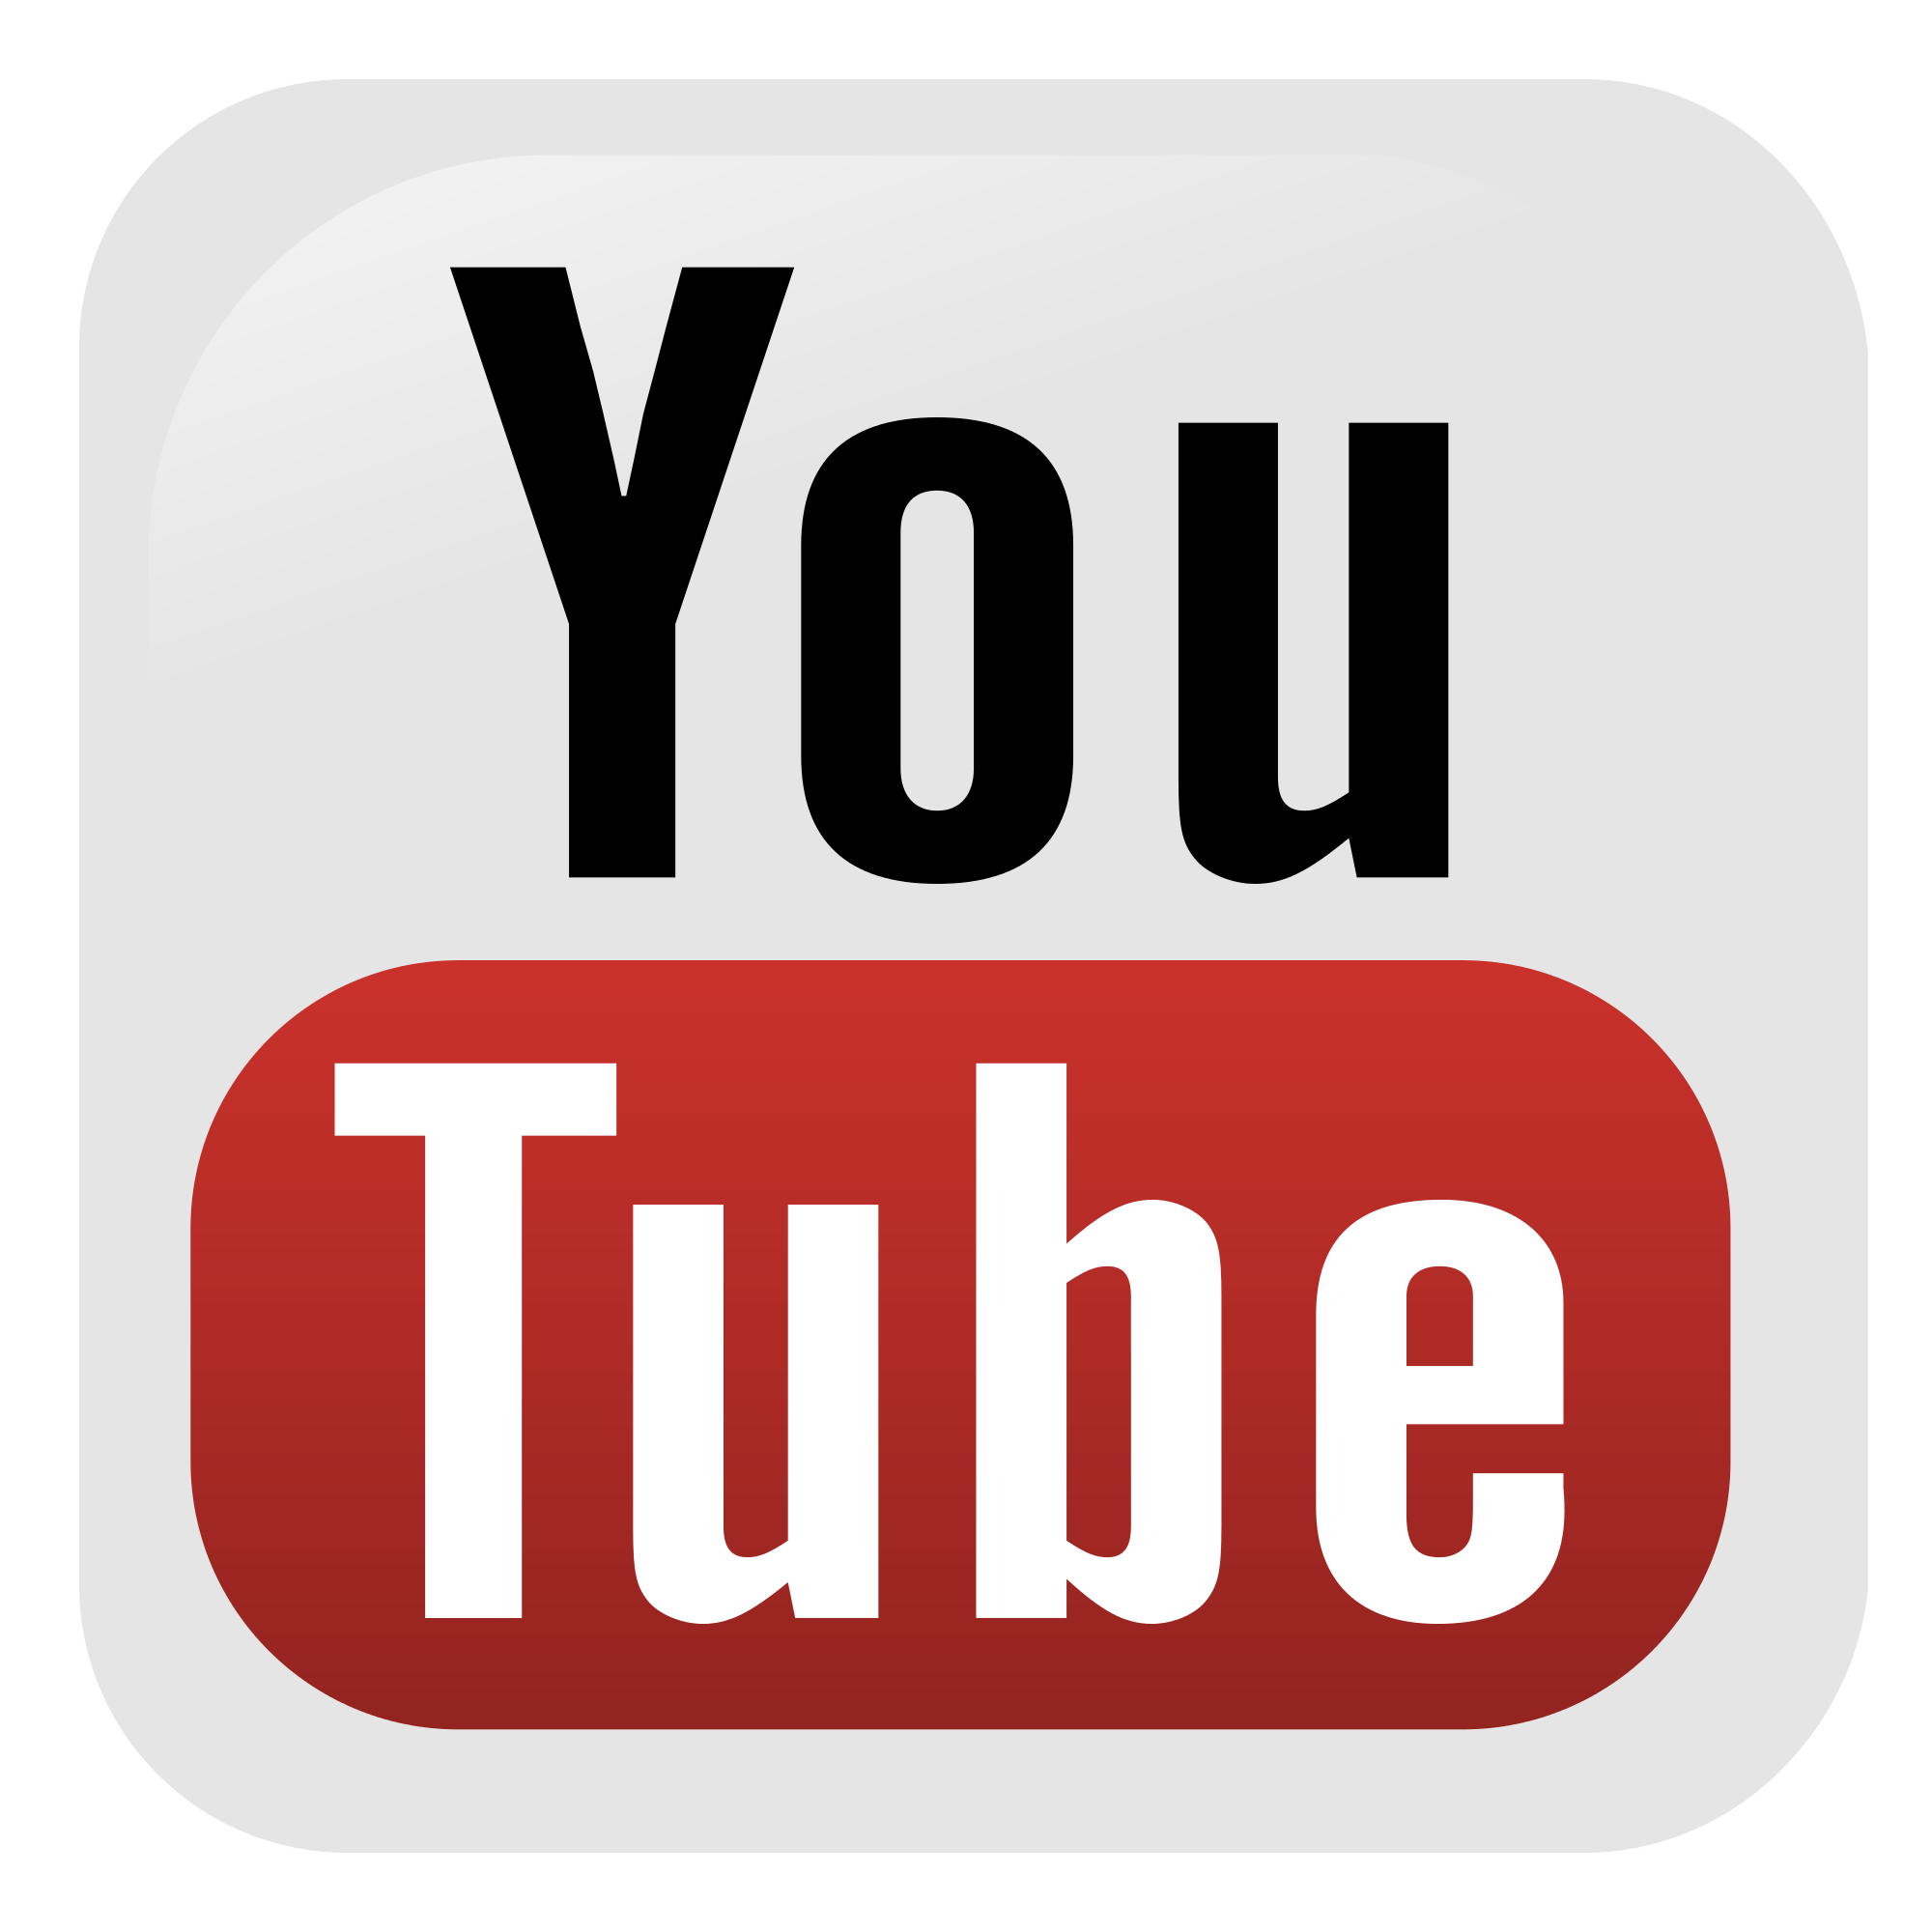 YouTube Official Logo - File:Youtube icon.svg - Wikimedia Commons